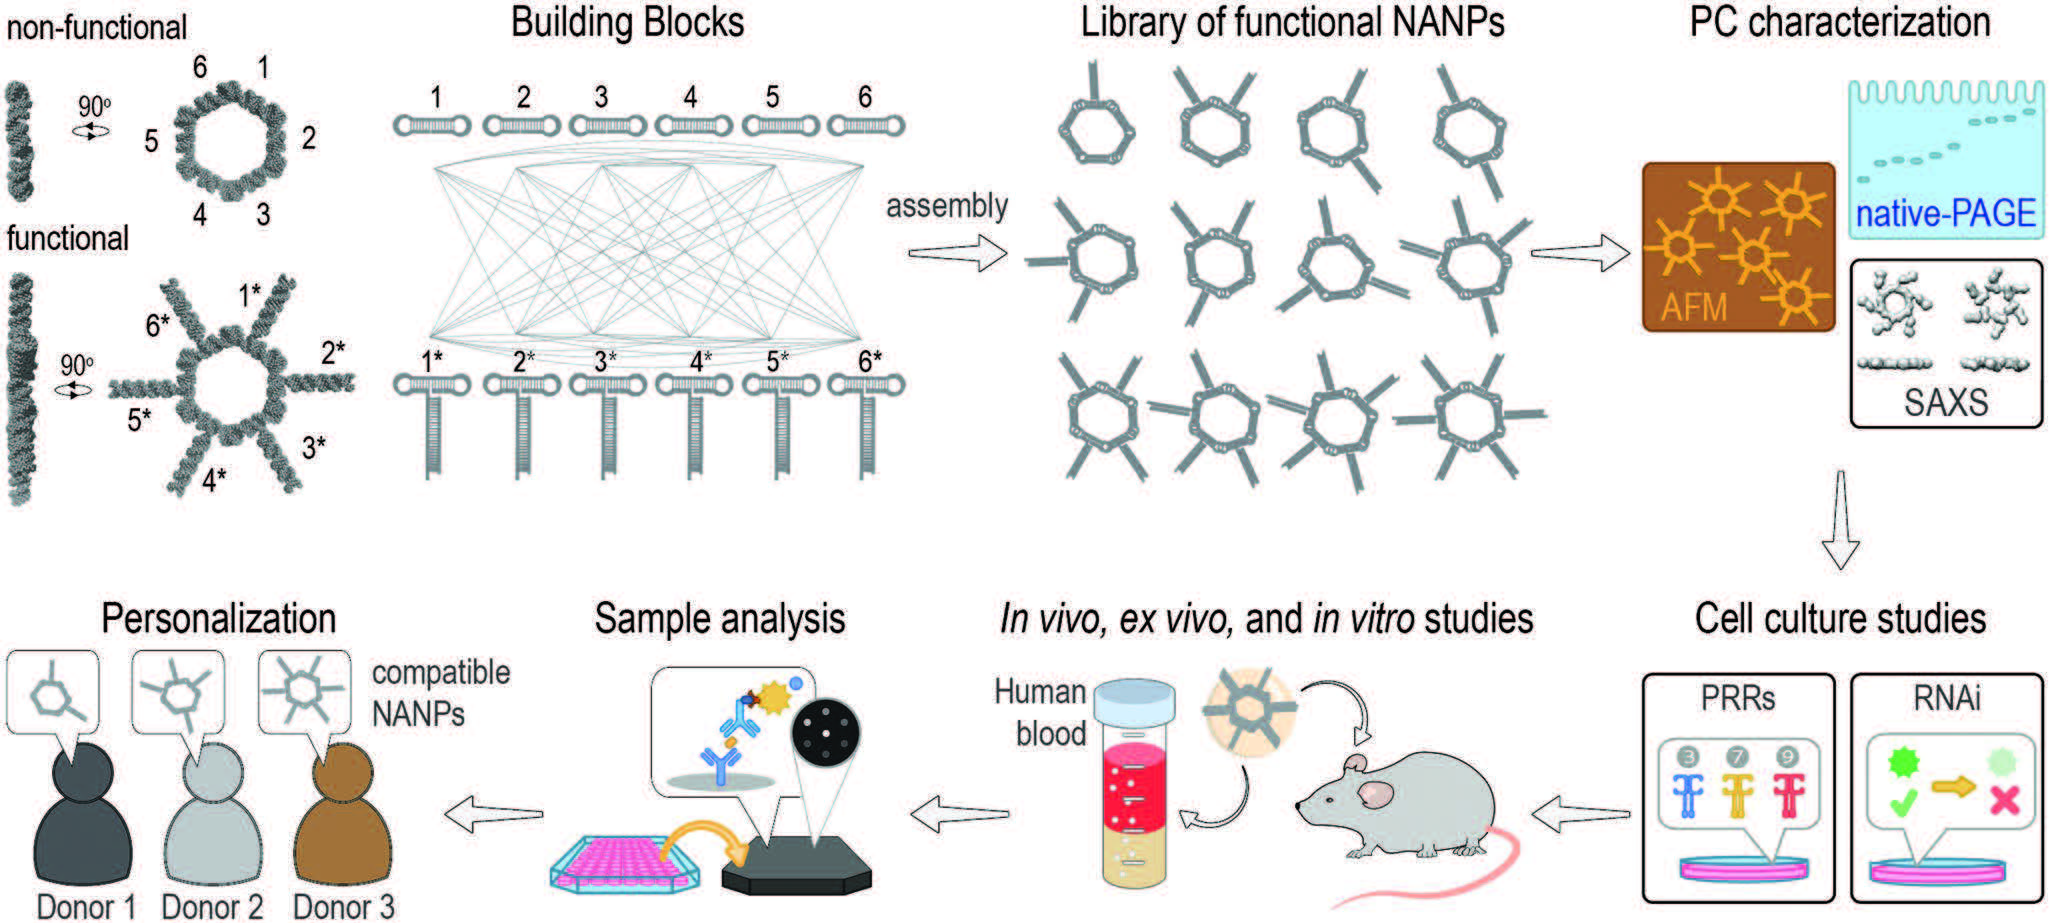 Expanding Structural Space for Immunomodulatory Nucleic Acid Nanoparticles (Nanps) via Spatial Arrangement of Their Therapeutic Moieties